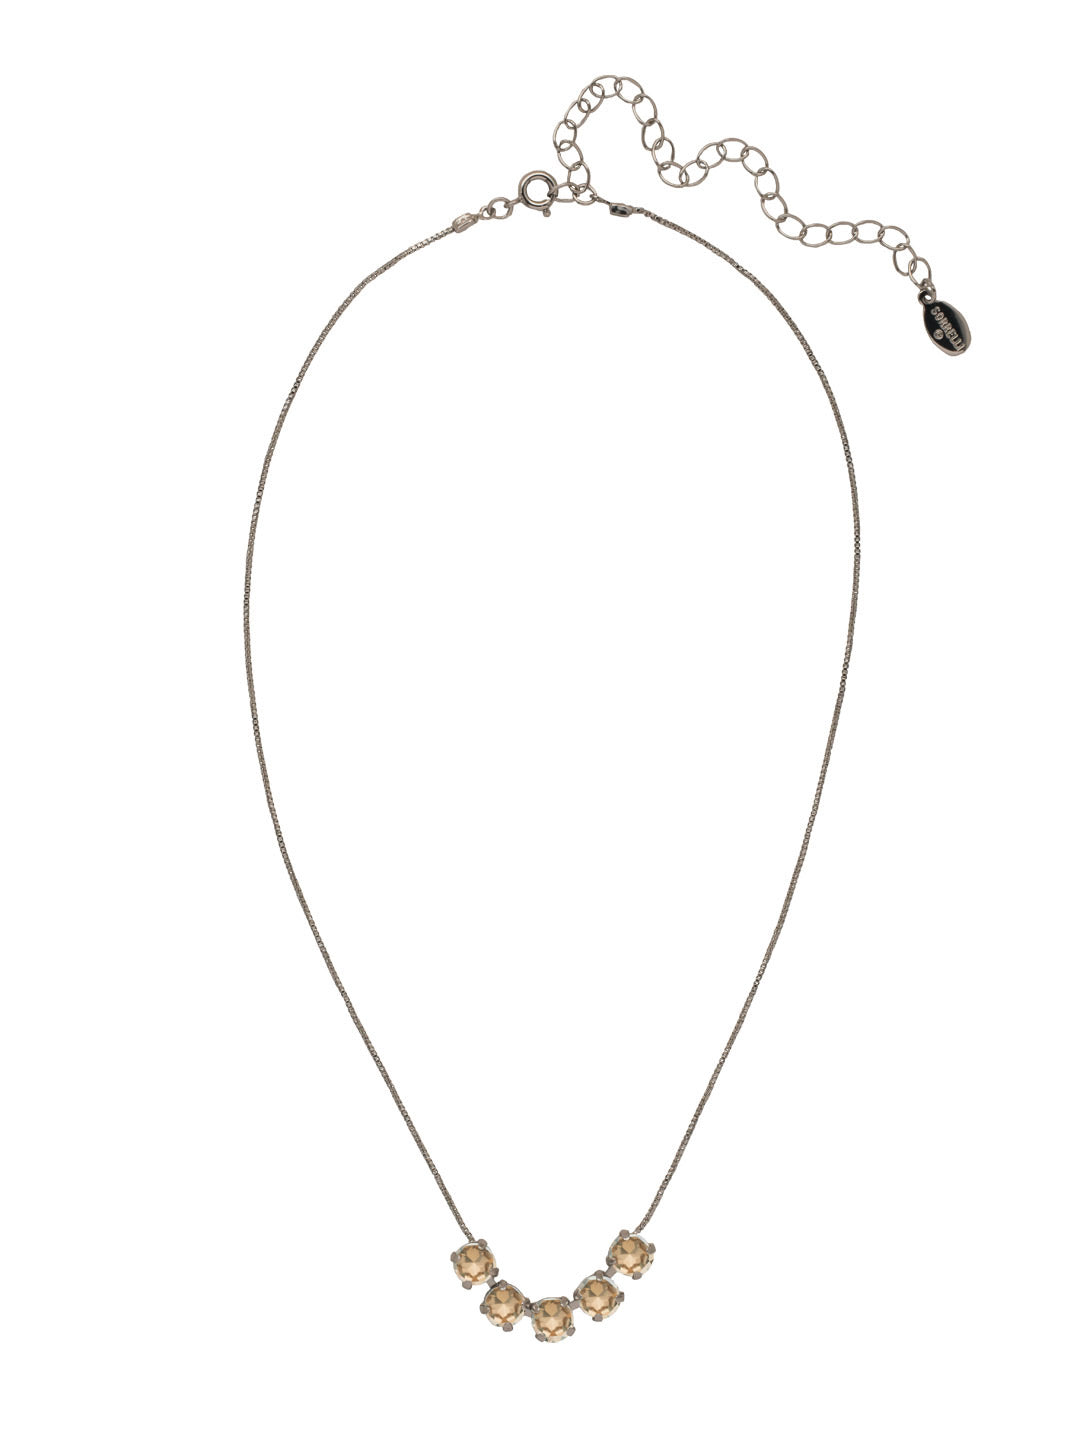 Shaughna Tennis Necklace - NFC84ASDCH - <p>The Shaughna Tennis Necklace features five crystals on a delicate adjustable chain. From Sorrelli's Dark Champagne collection in our Antique Silver-tone finish.</p>